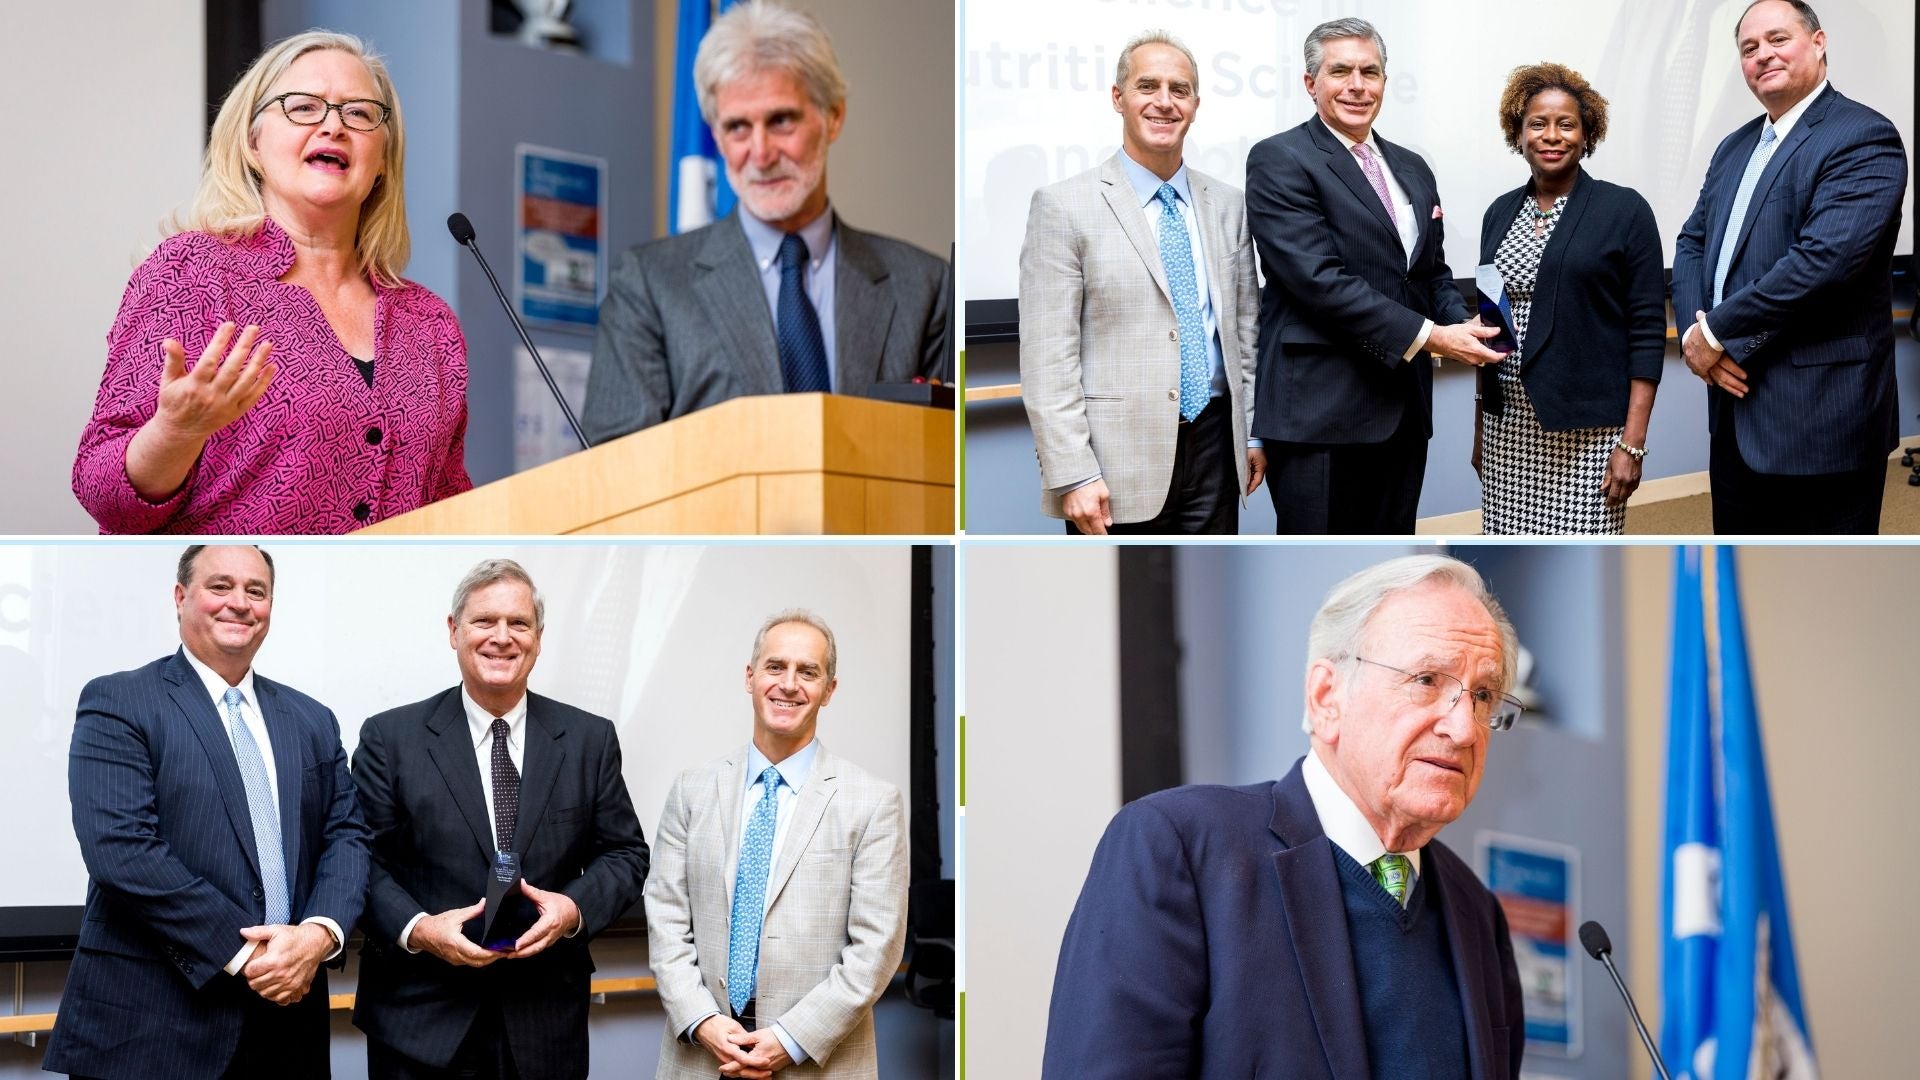 Jean Mayer Prize recipients from the 2018 ceremony: CSPI, Mission: Readiness, Tom Vilsack, and Tom Harkin